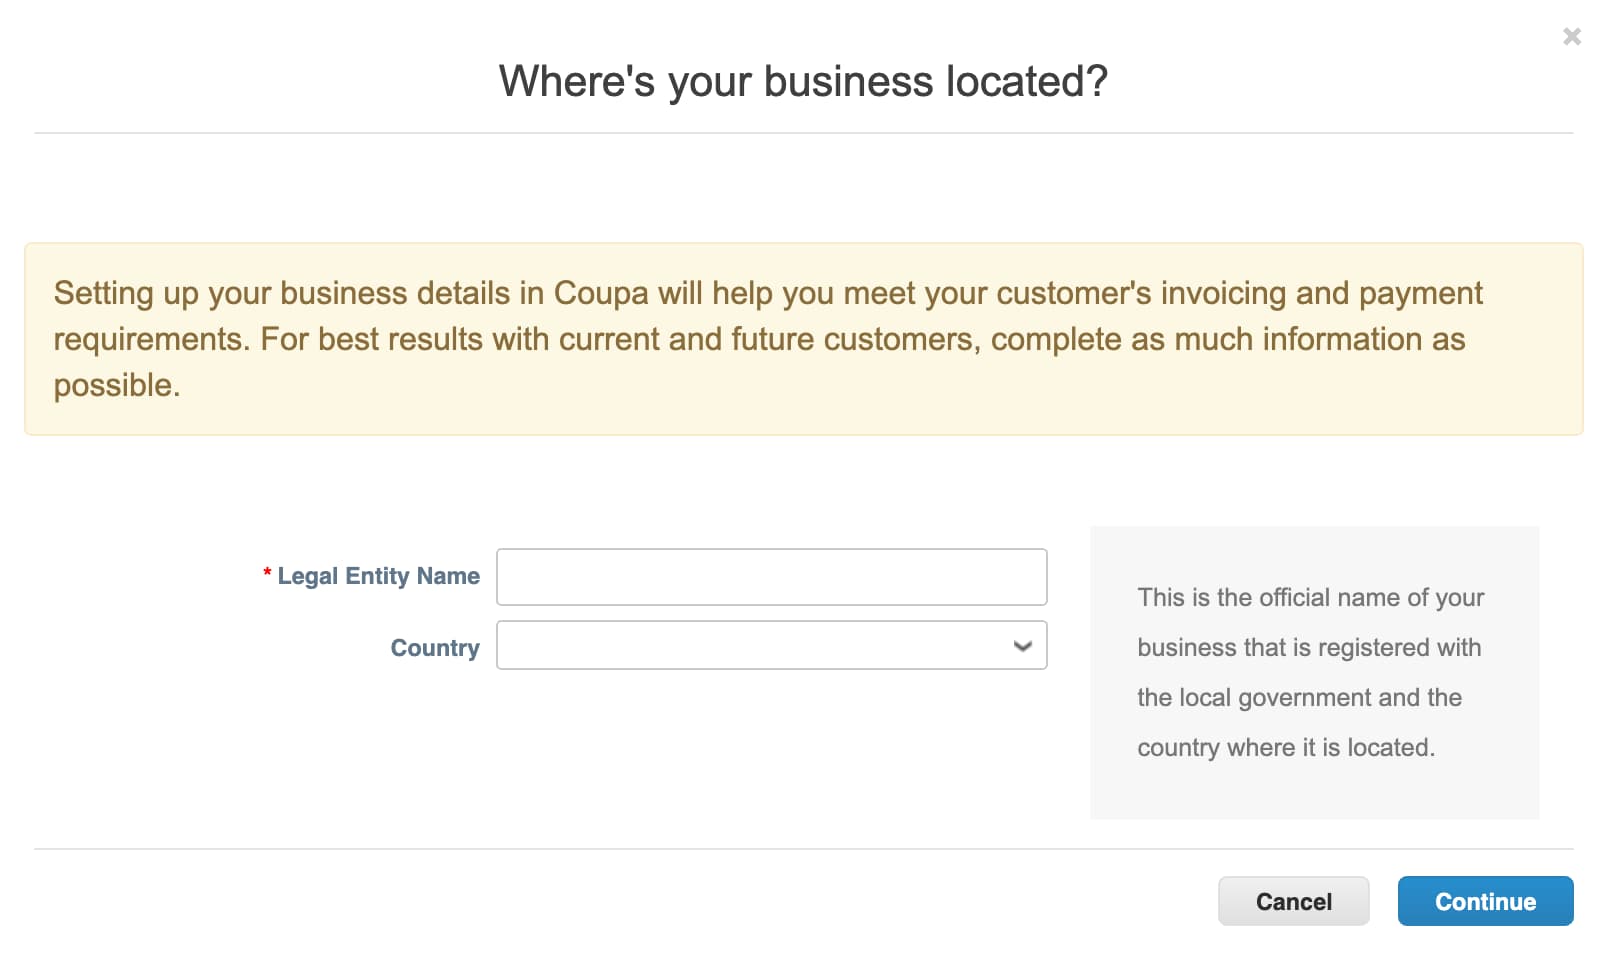 Step 2: Where's your business located?